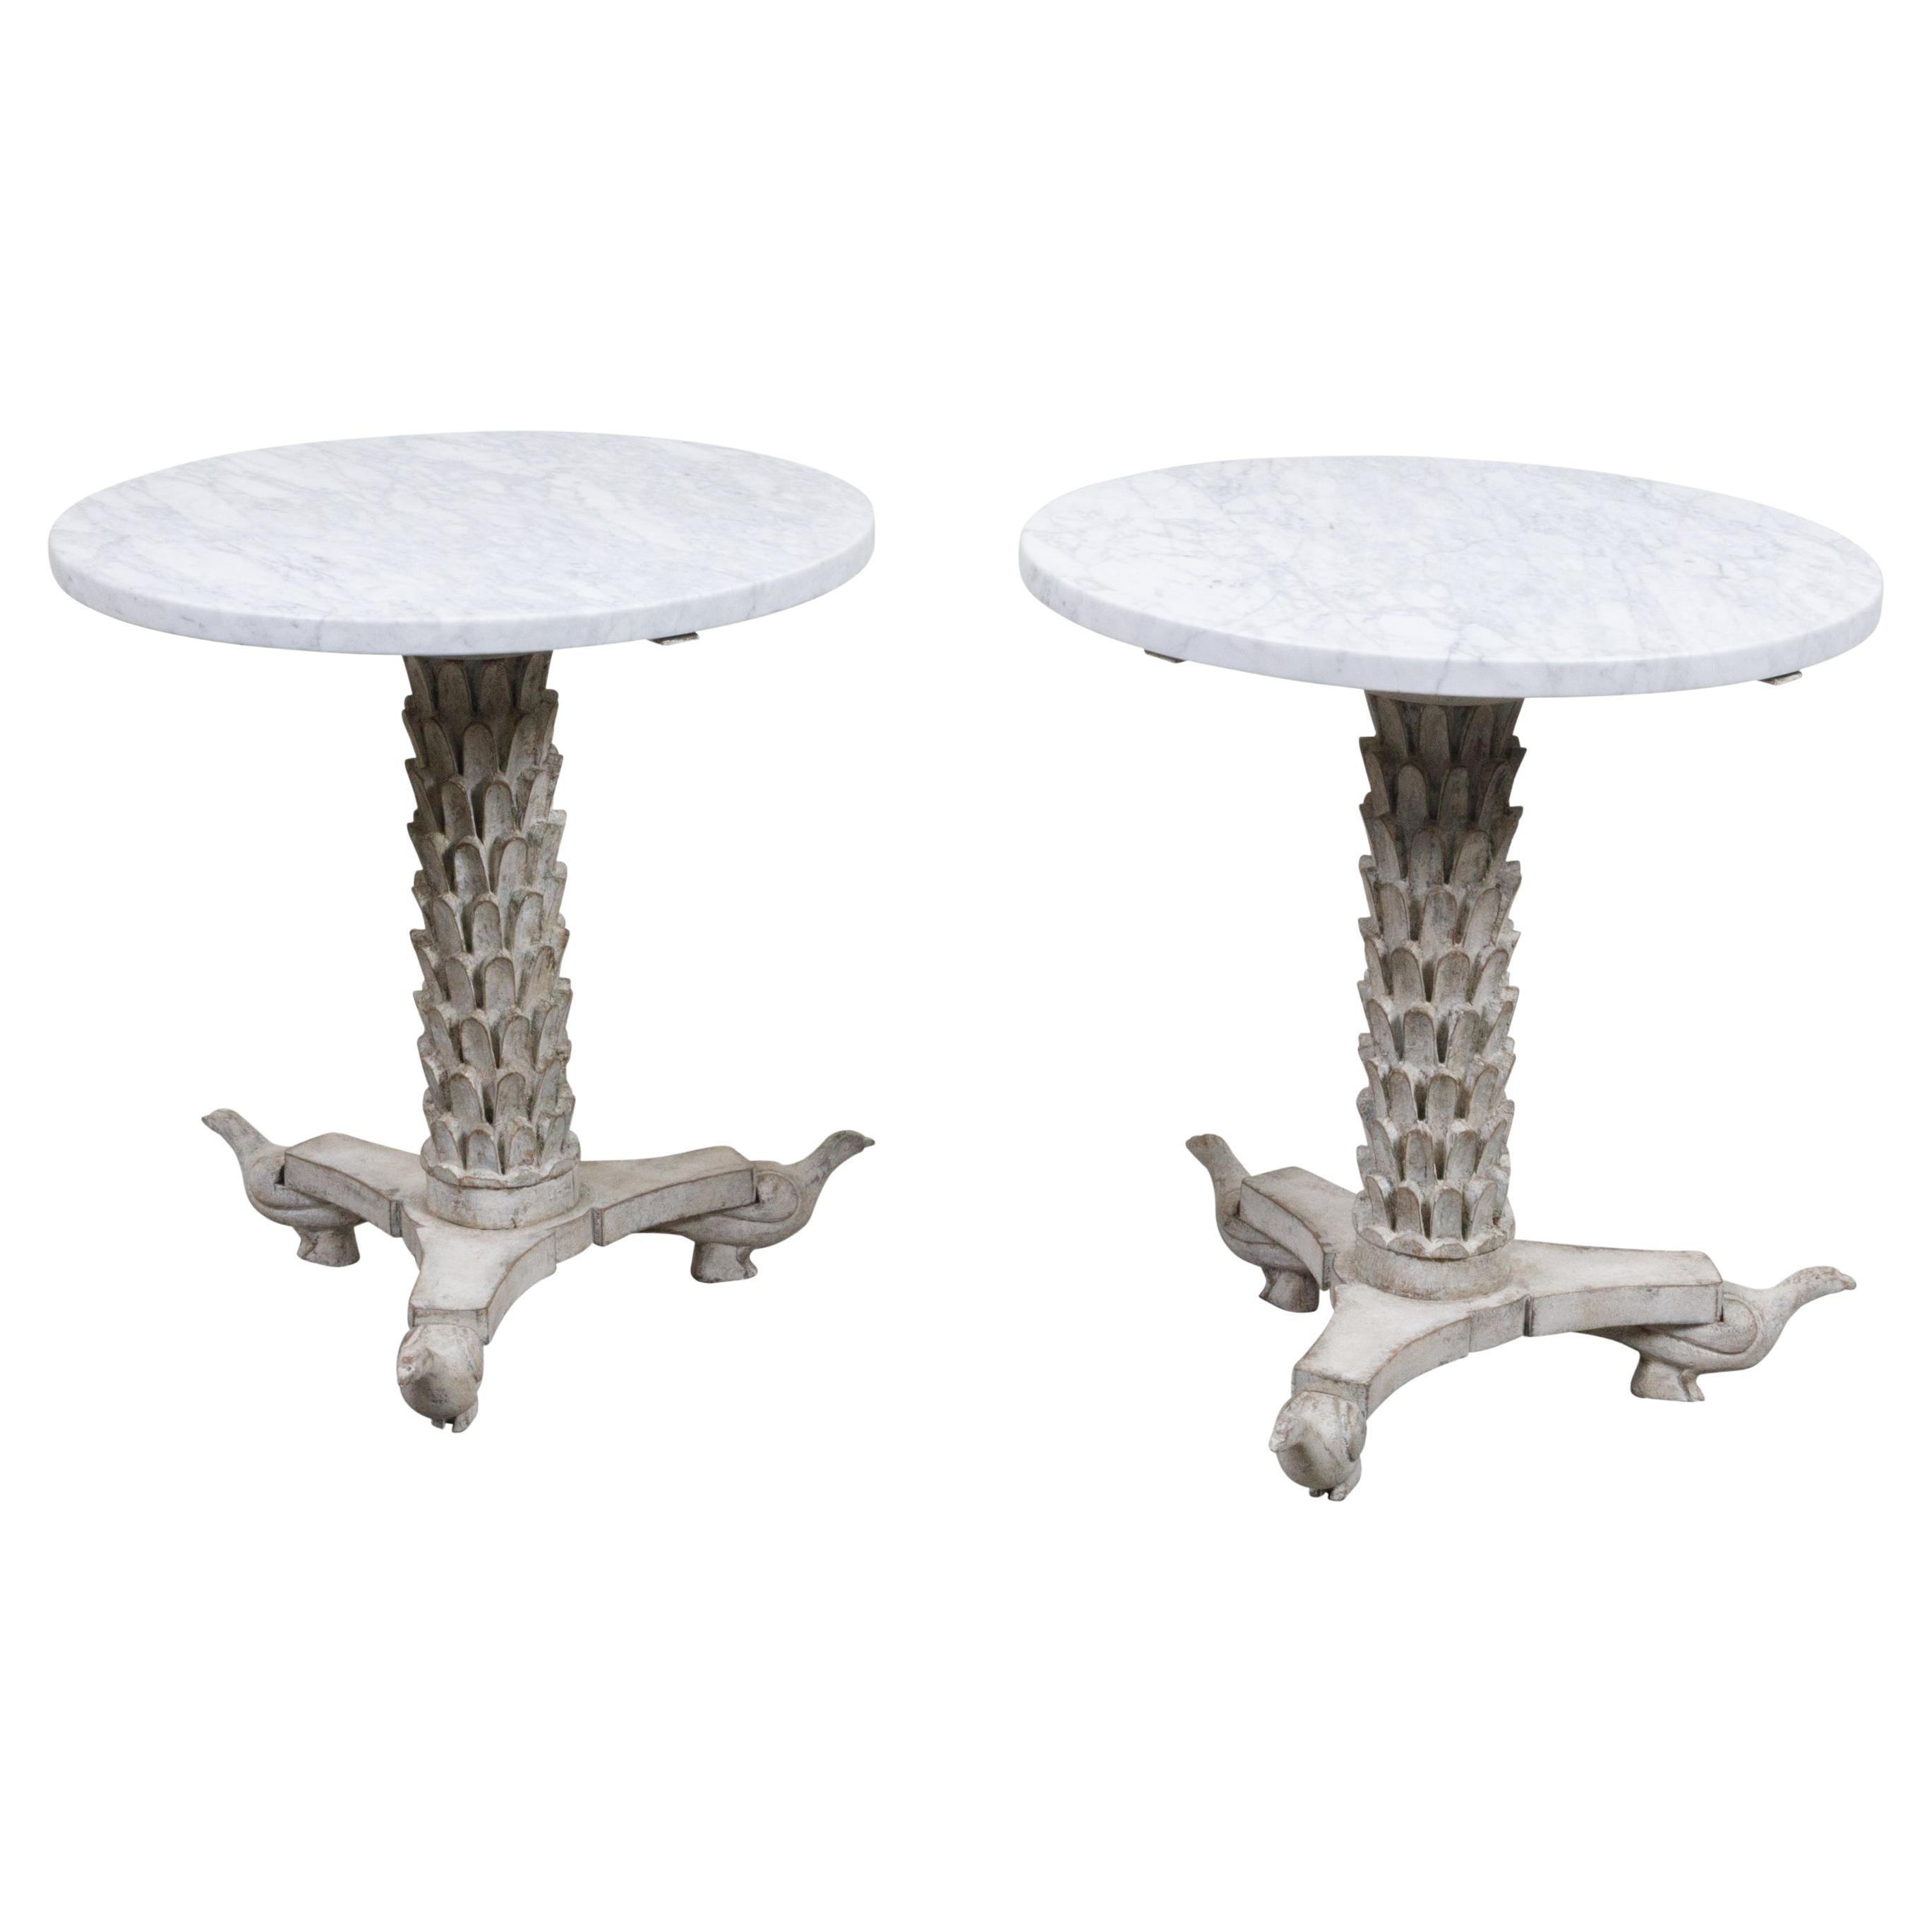 Pair of Italian Side Tables with White Marble Tops and Carved Palm Tree Bases